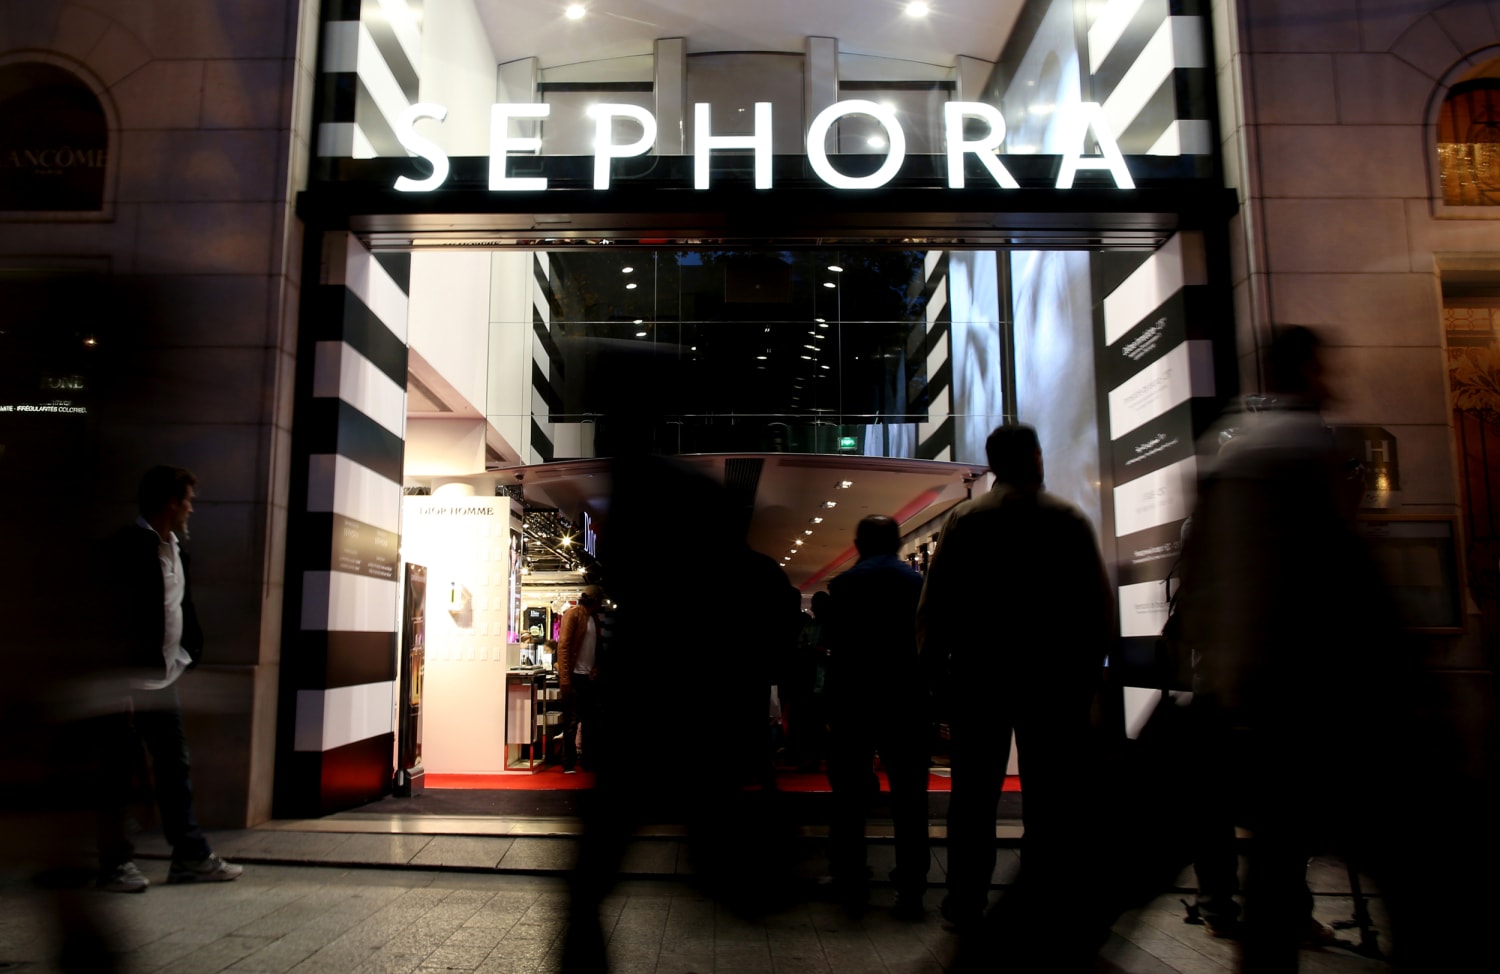 Sephora rolls out “New Sephora Experience” connected store concept